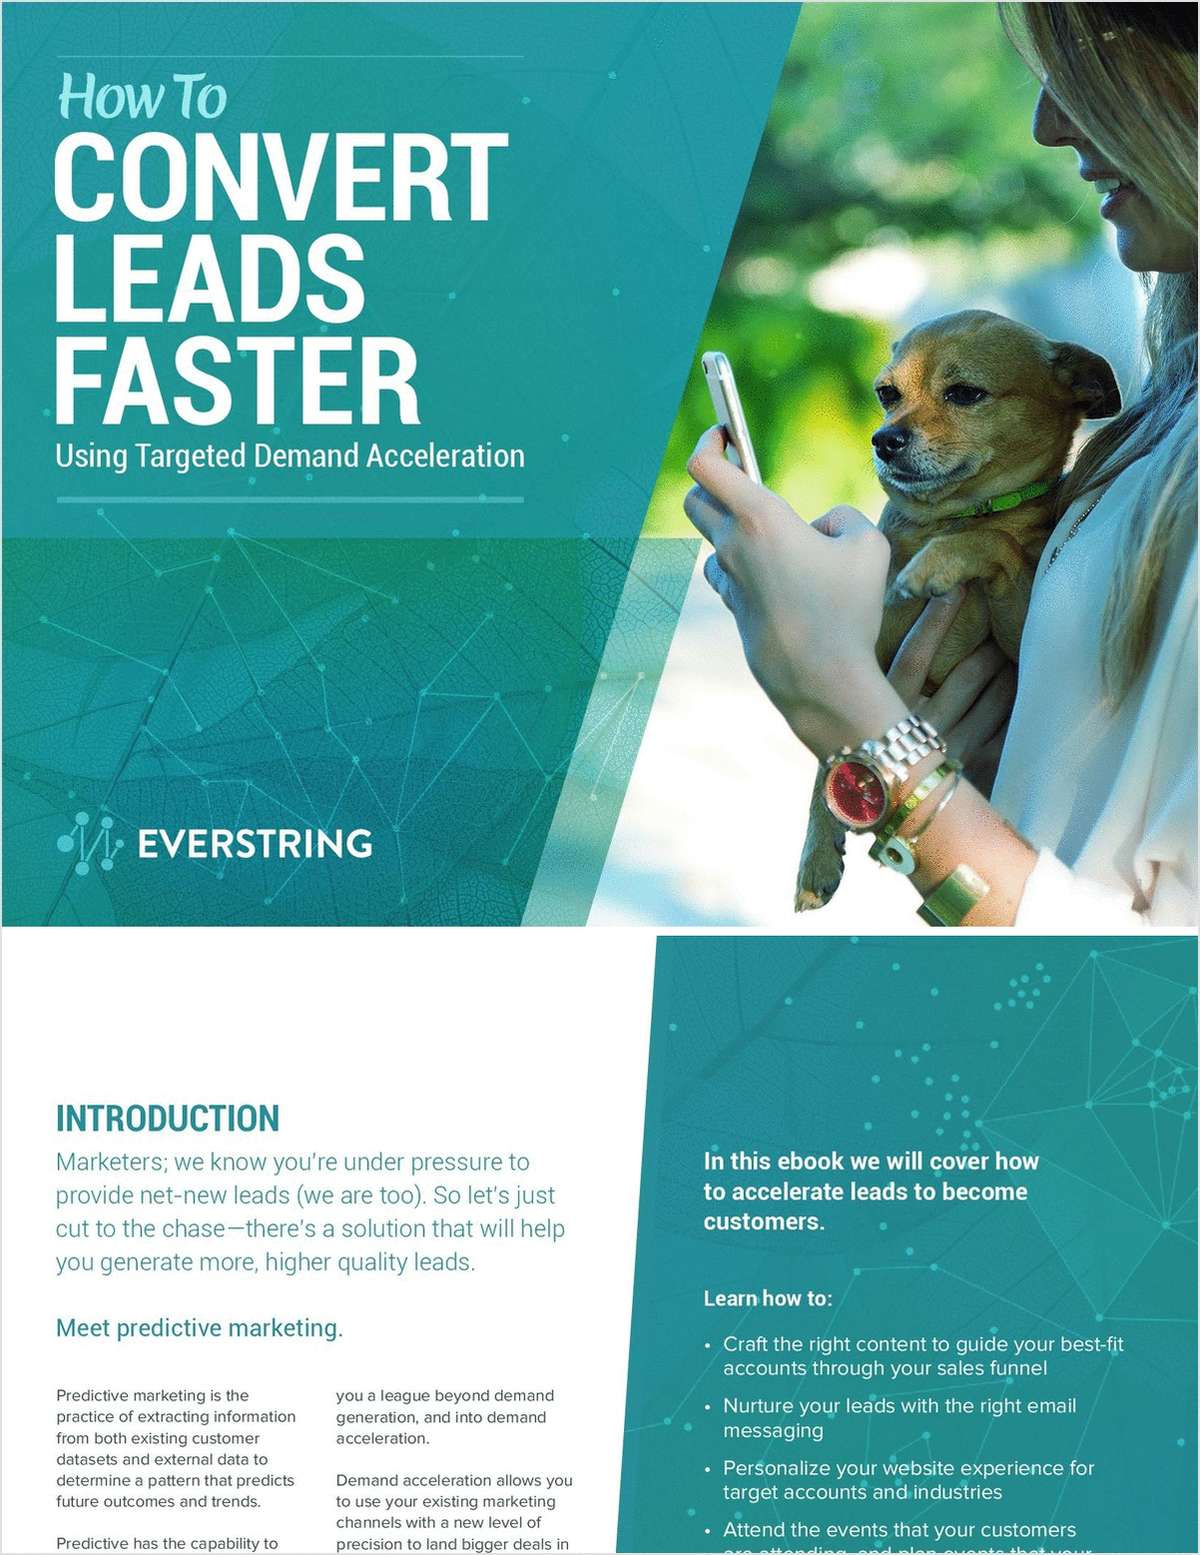 How to Convert Leads Faster Using Targeted Demand Acceleration